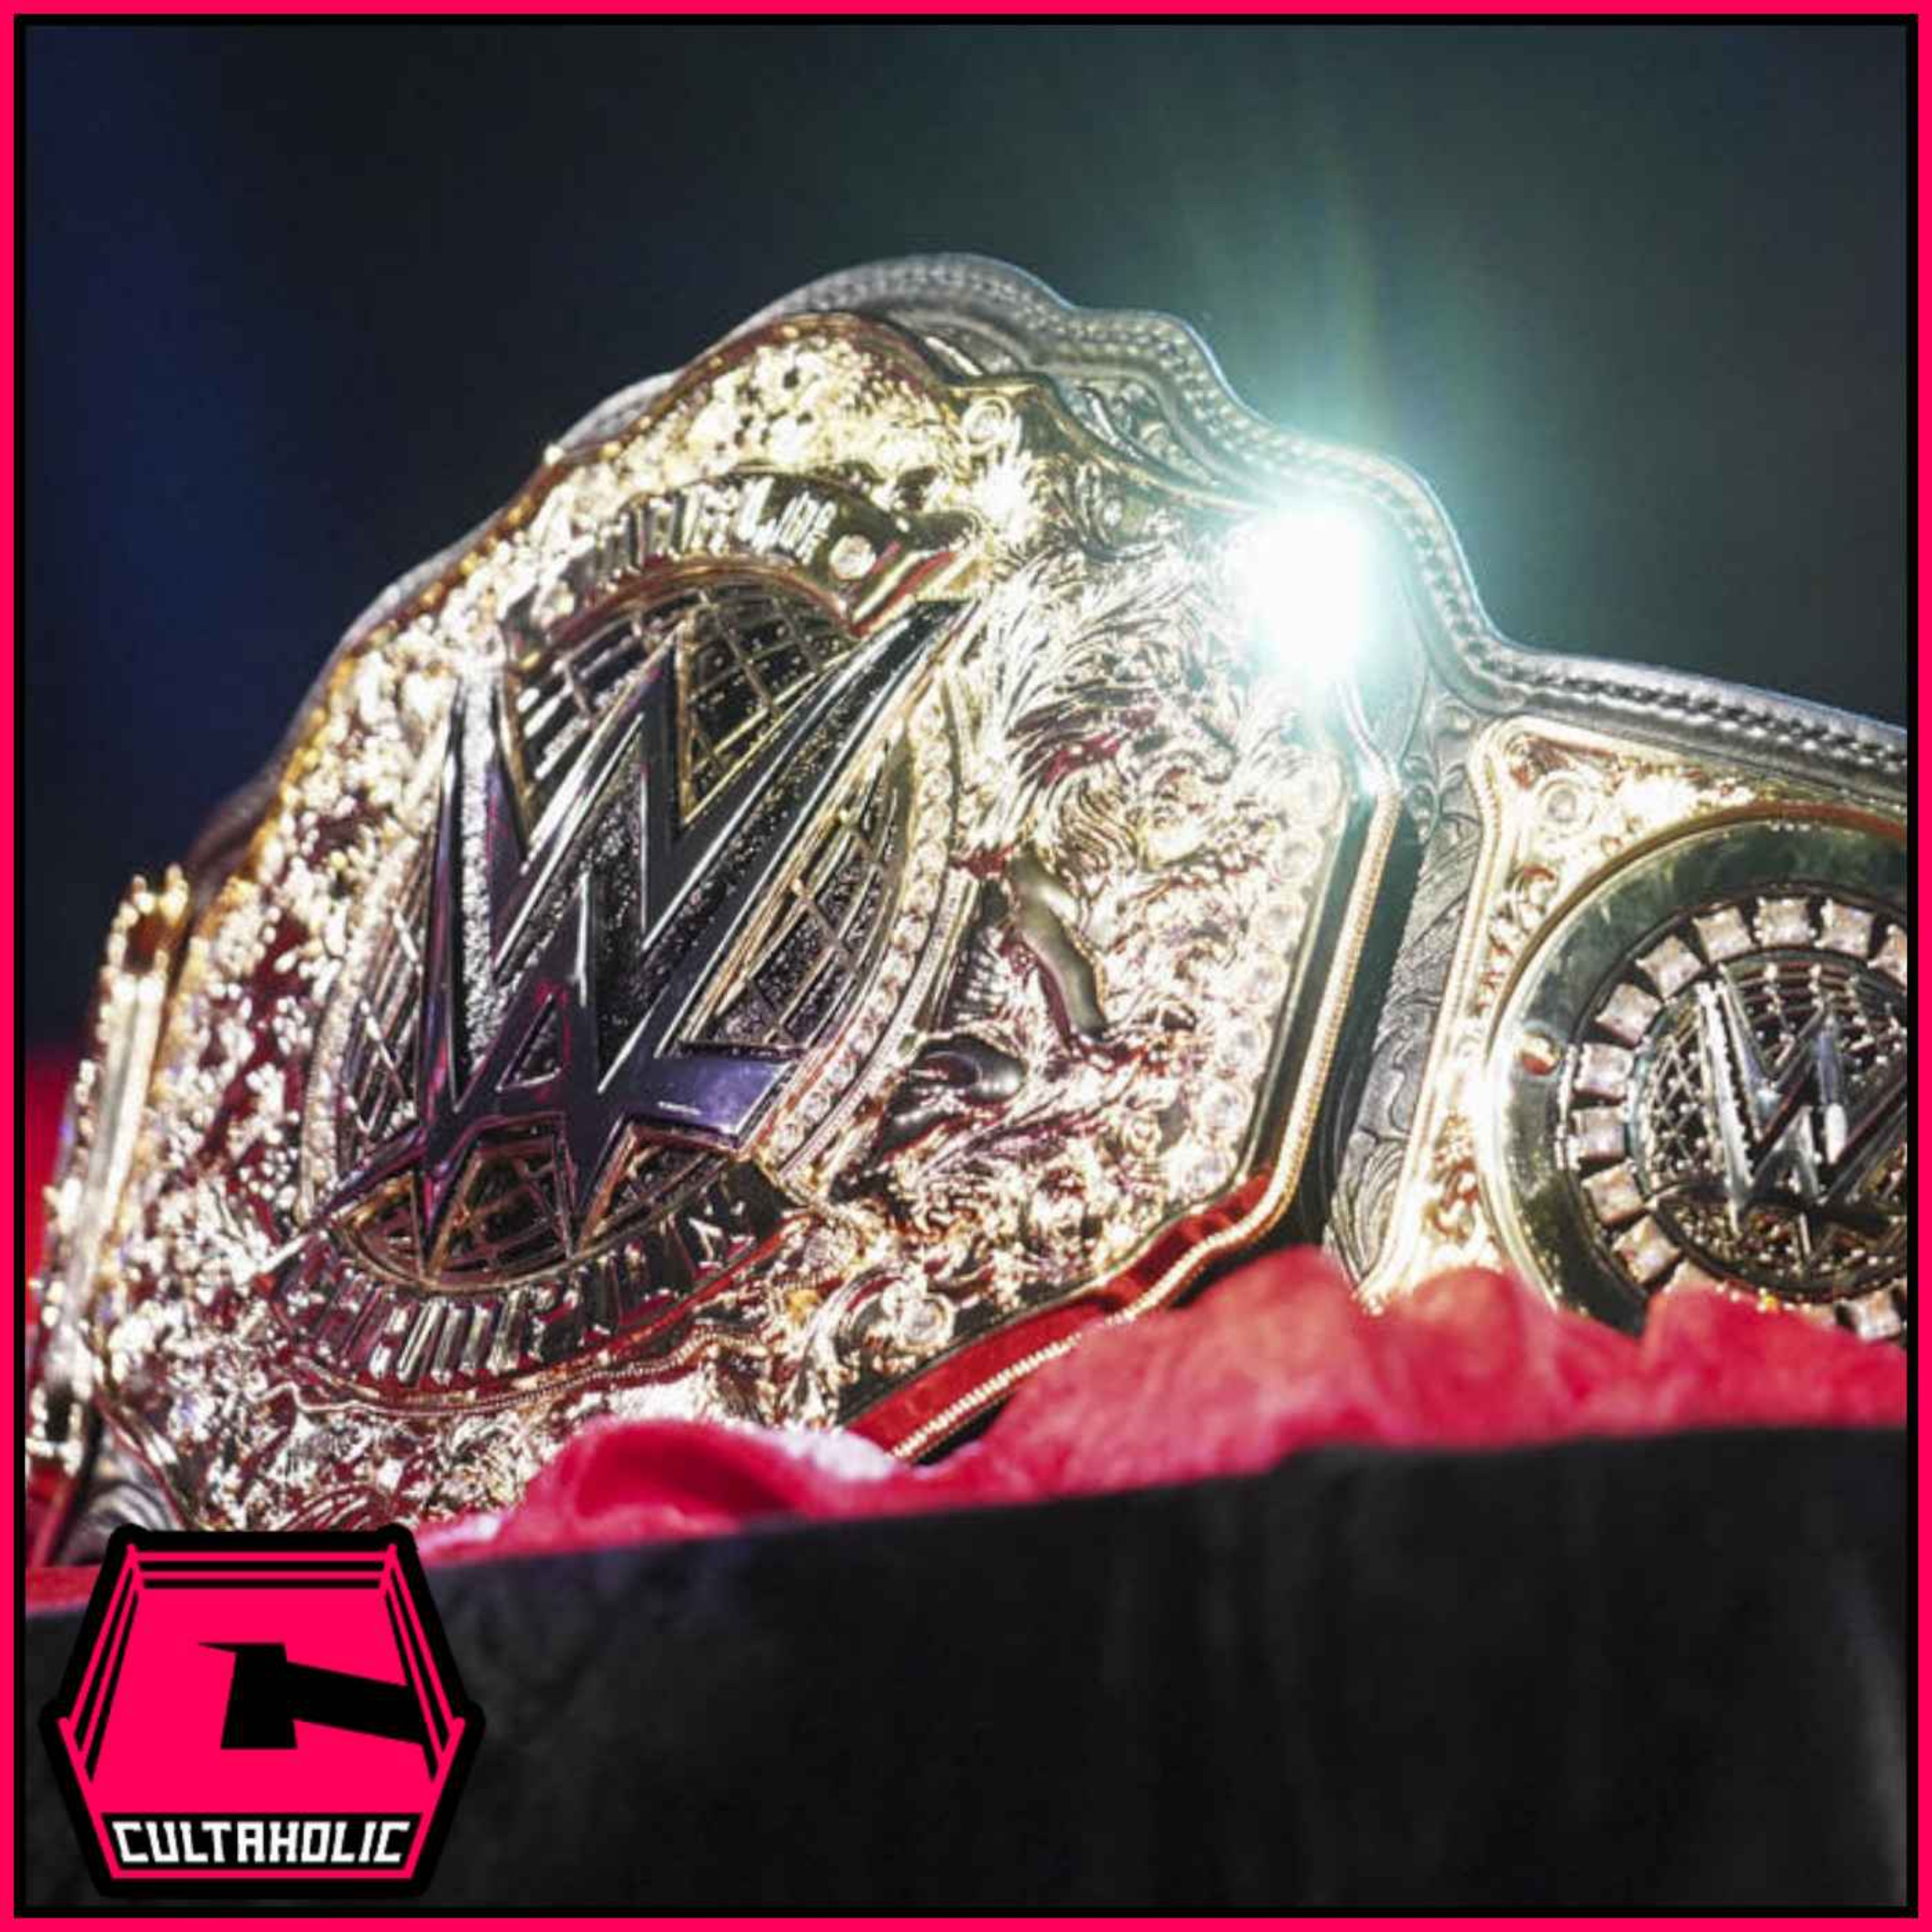 INTERVIEW: BELTS BY DAN (BeltFanDan) On The New WWE Title, Making Belts For NJPW And The Yankees